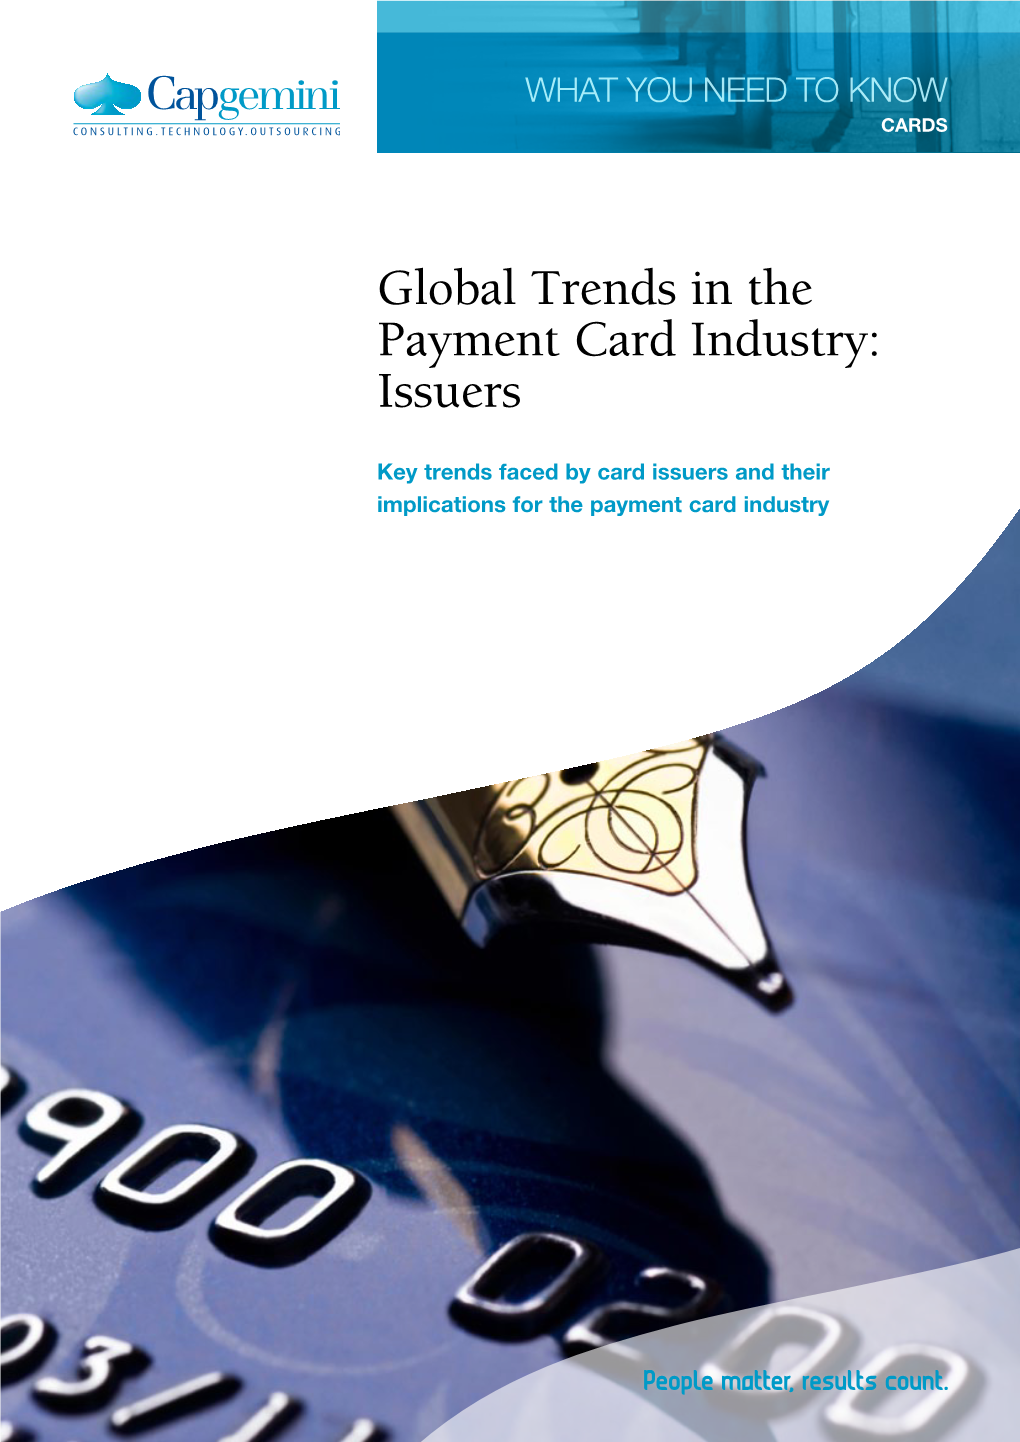 Global Trends in the Payment Card Industry: Issuers